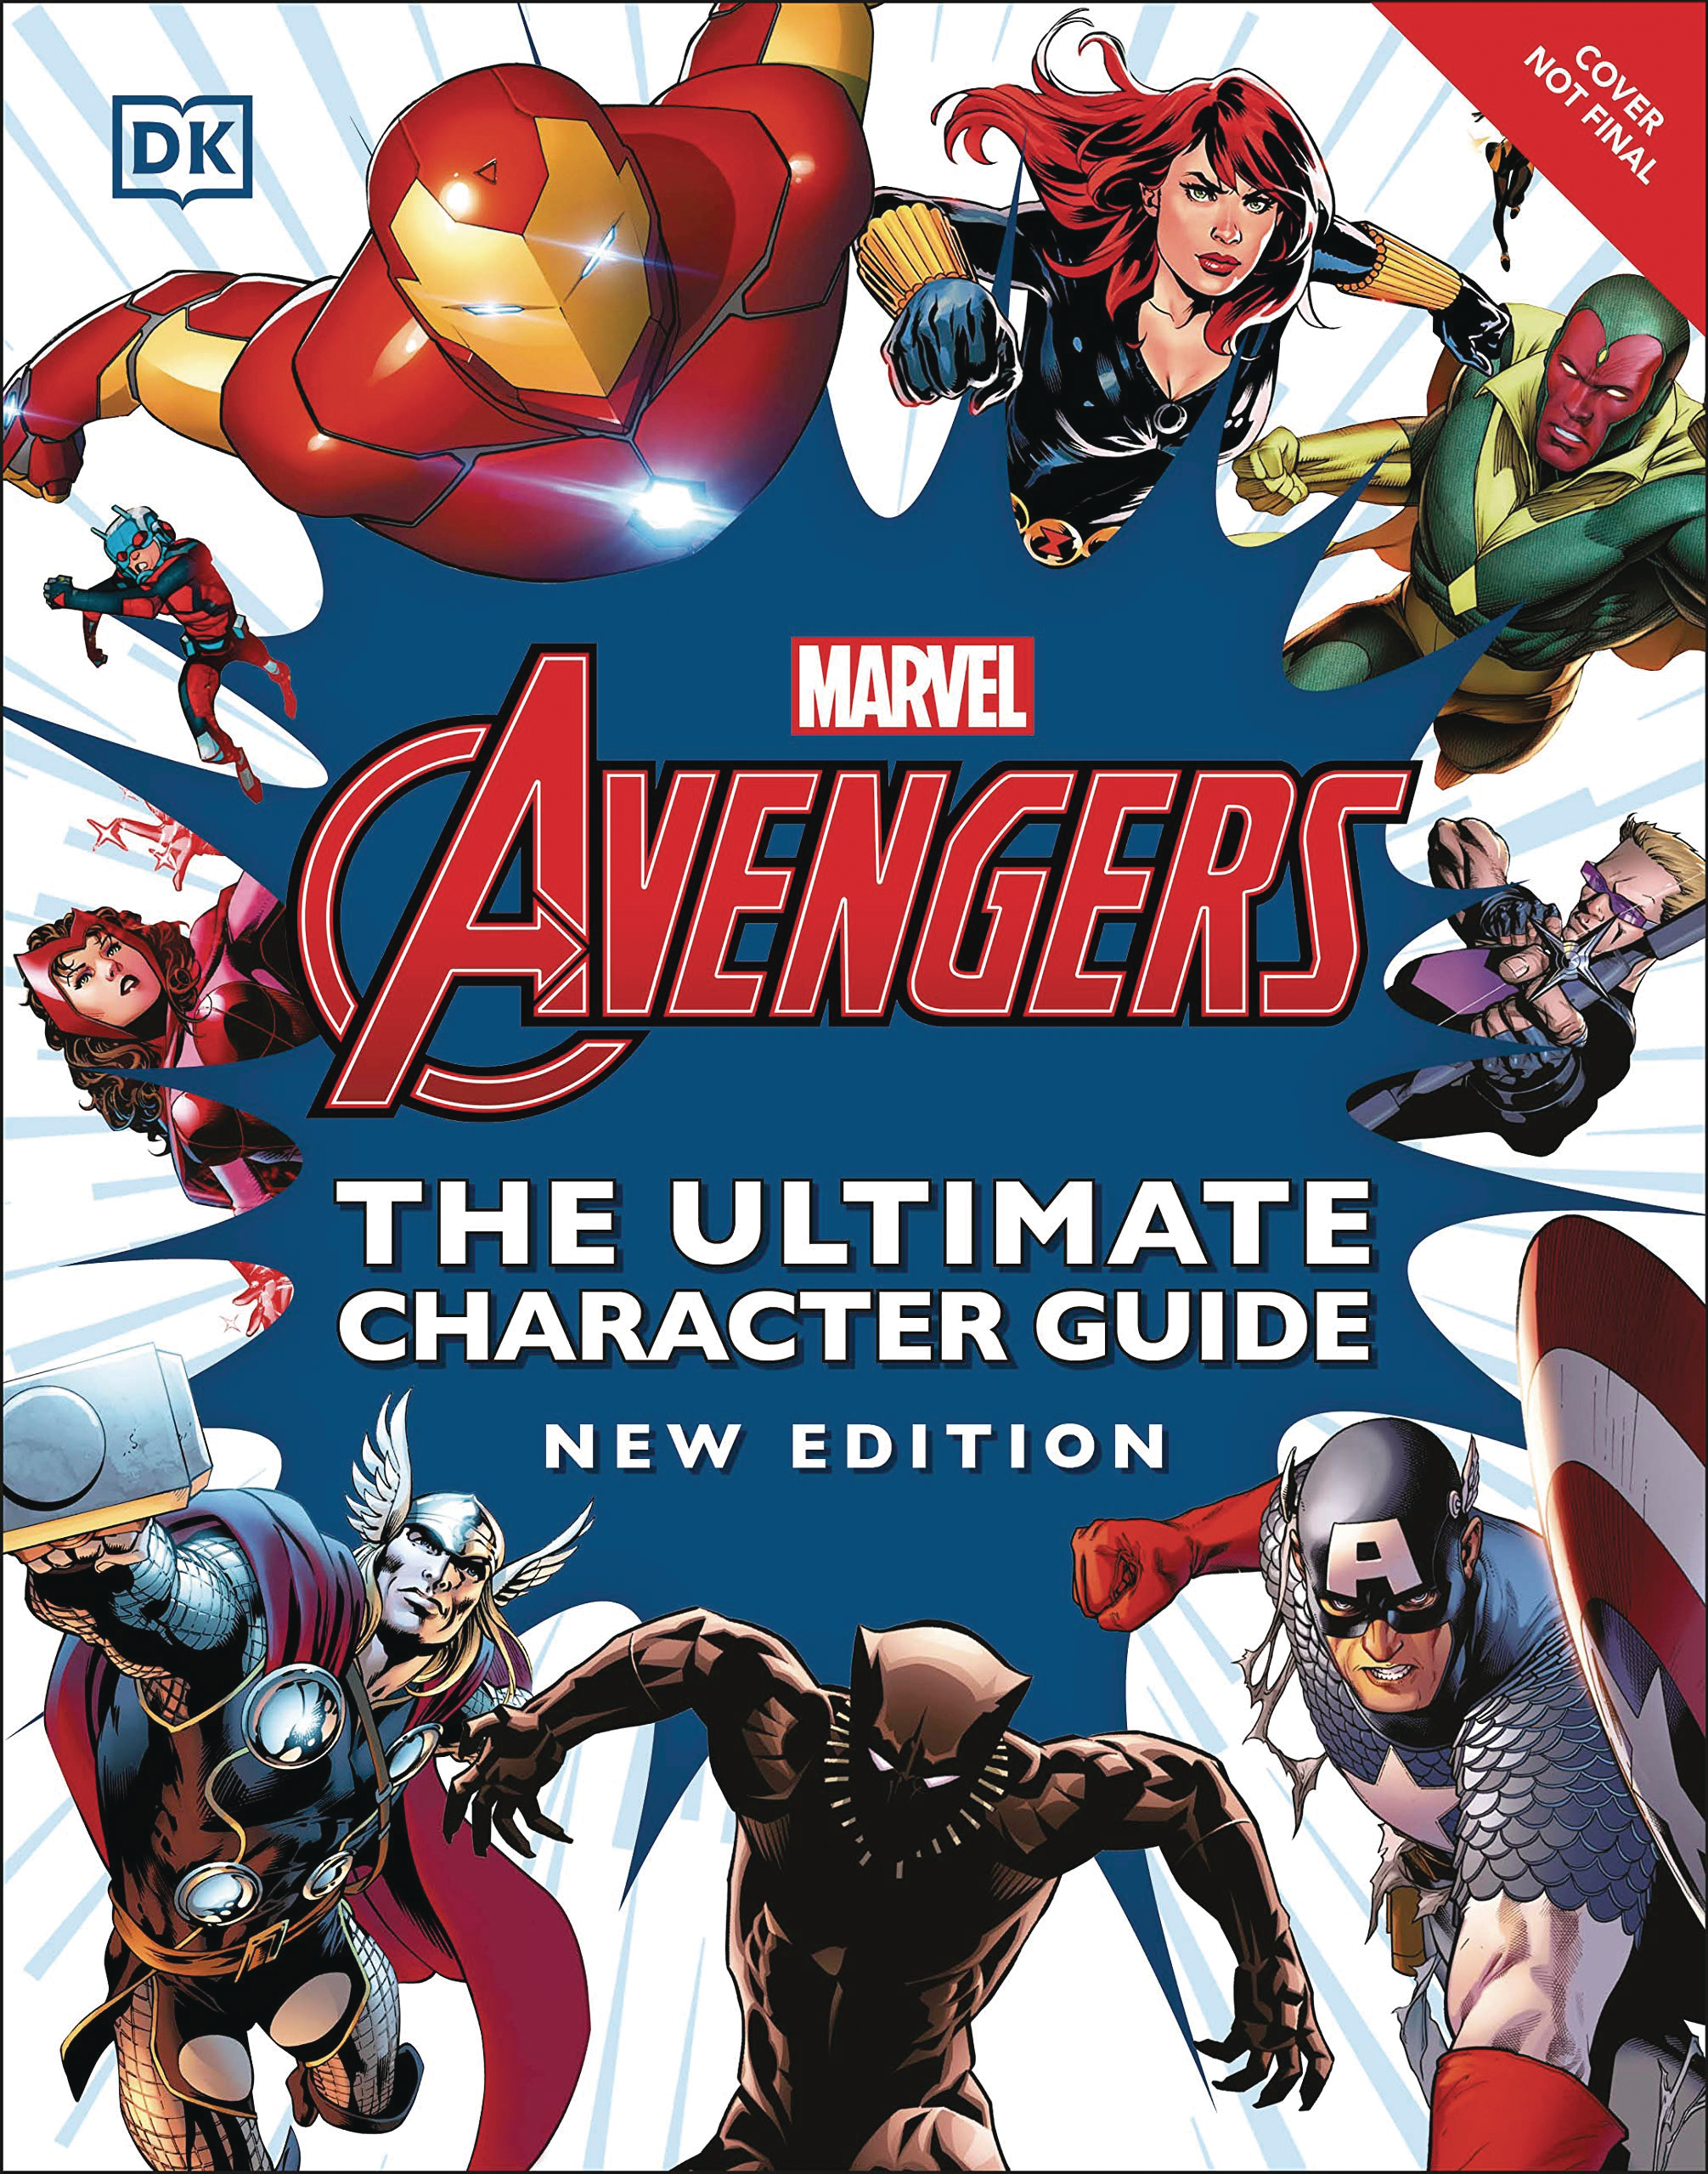 Marvel Avengers Ult Character Guide New Edition